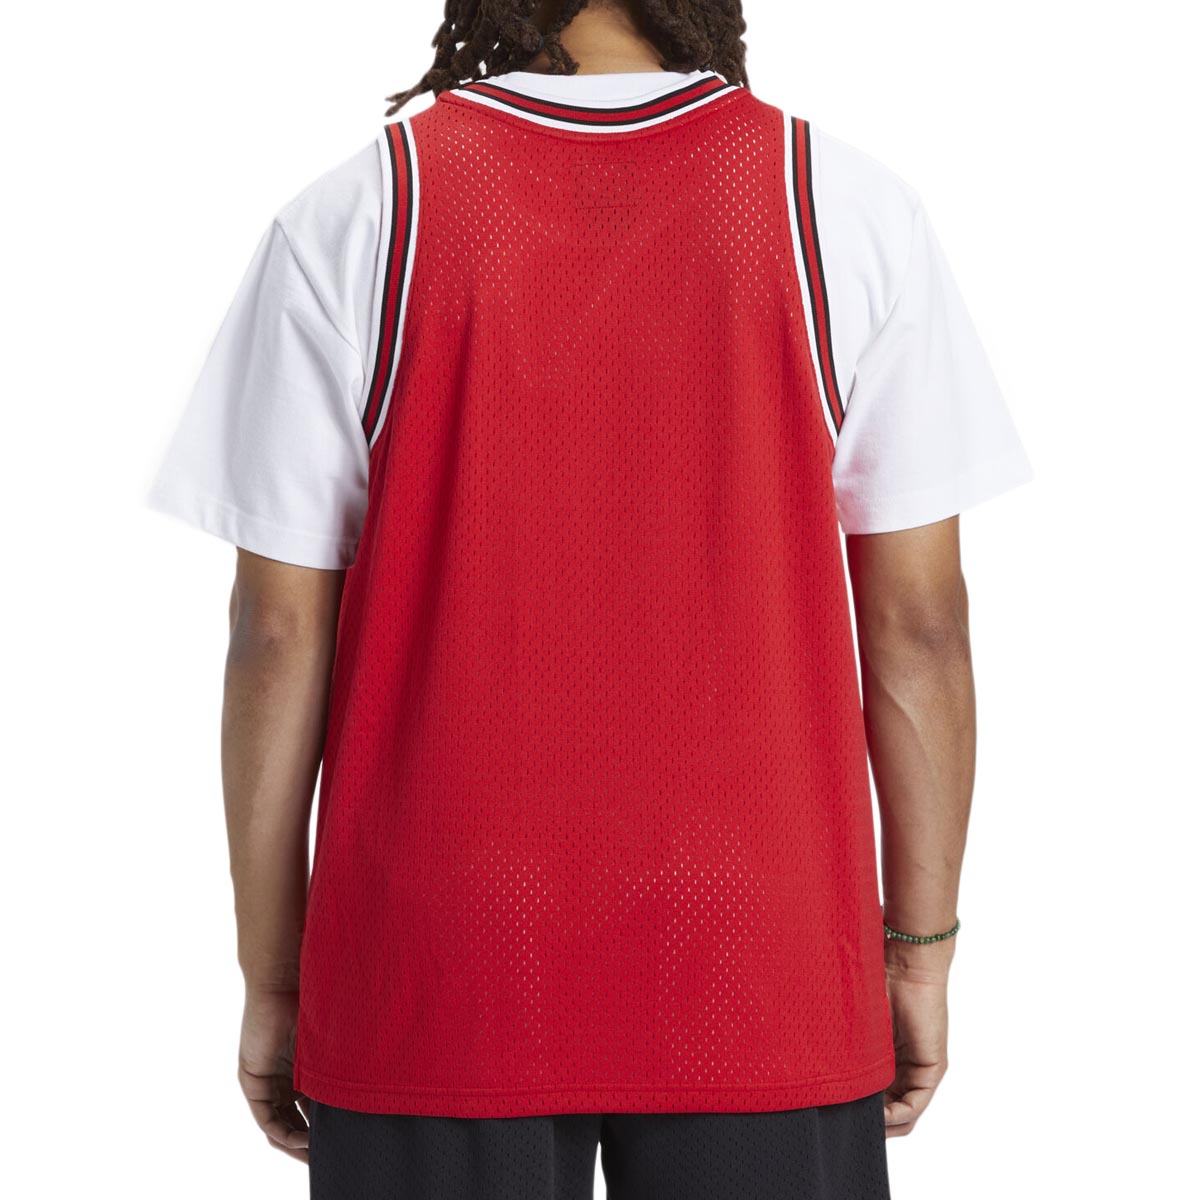 DC Chi Town Jersey - Racing Red image 2